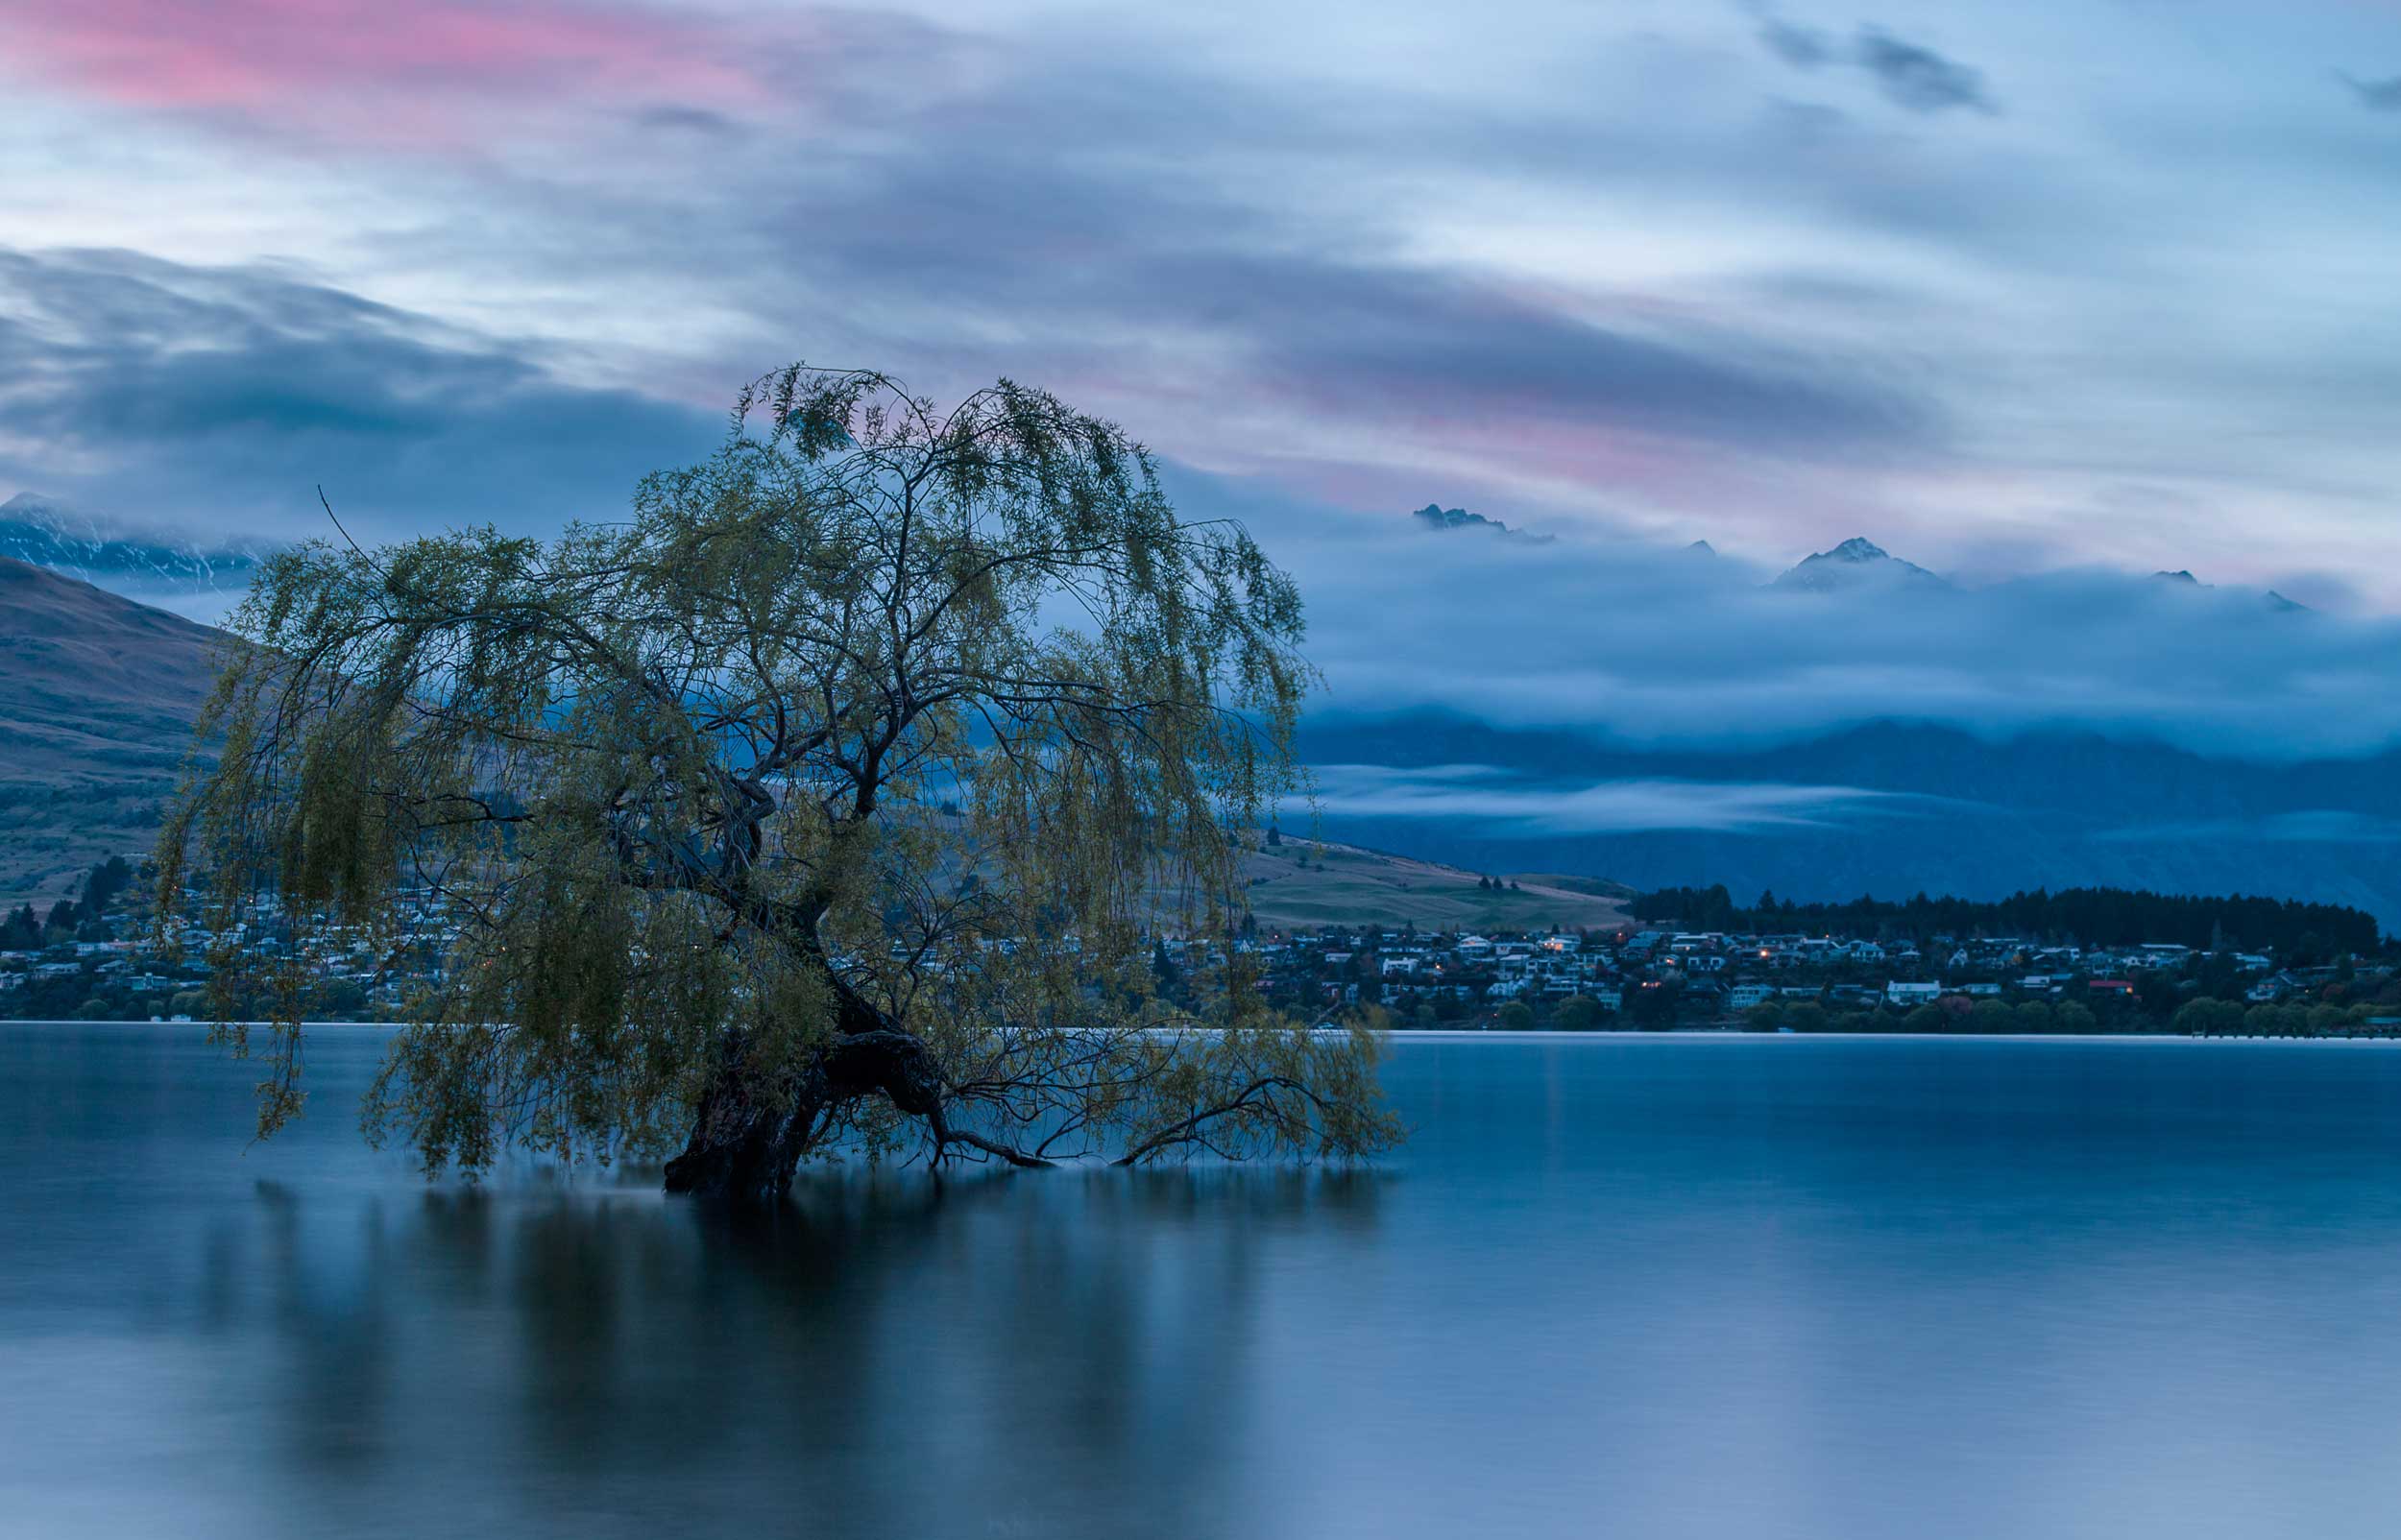 A drooping tree in a lake with a cloud-covered mountain range behind it, Queenstown, New Zealand